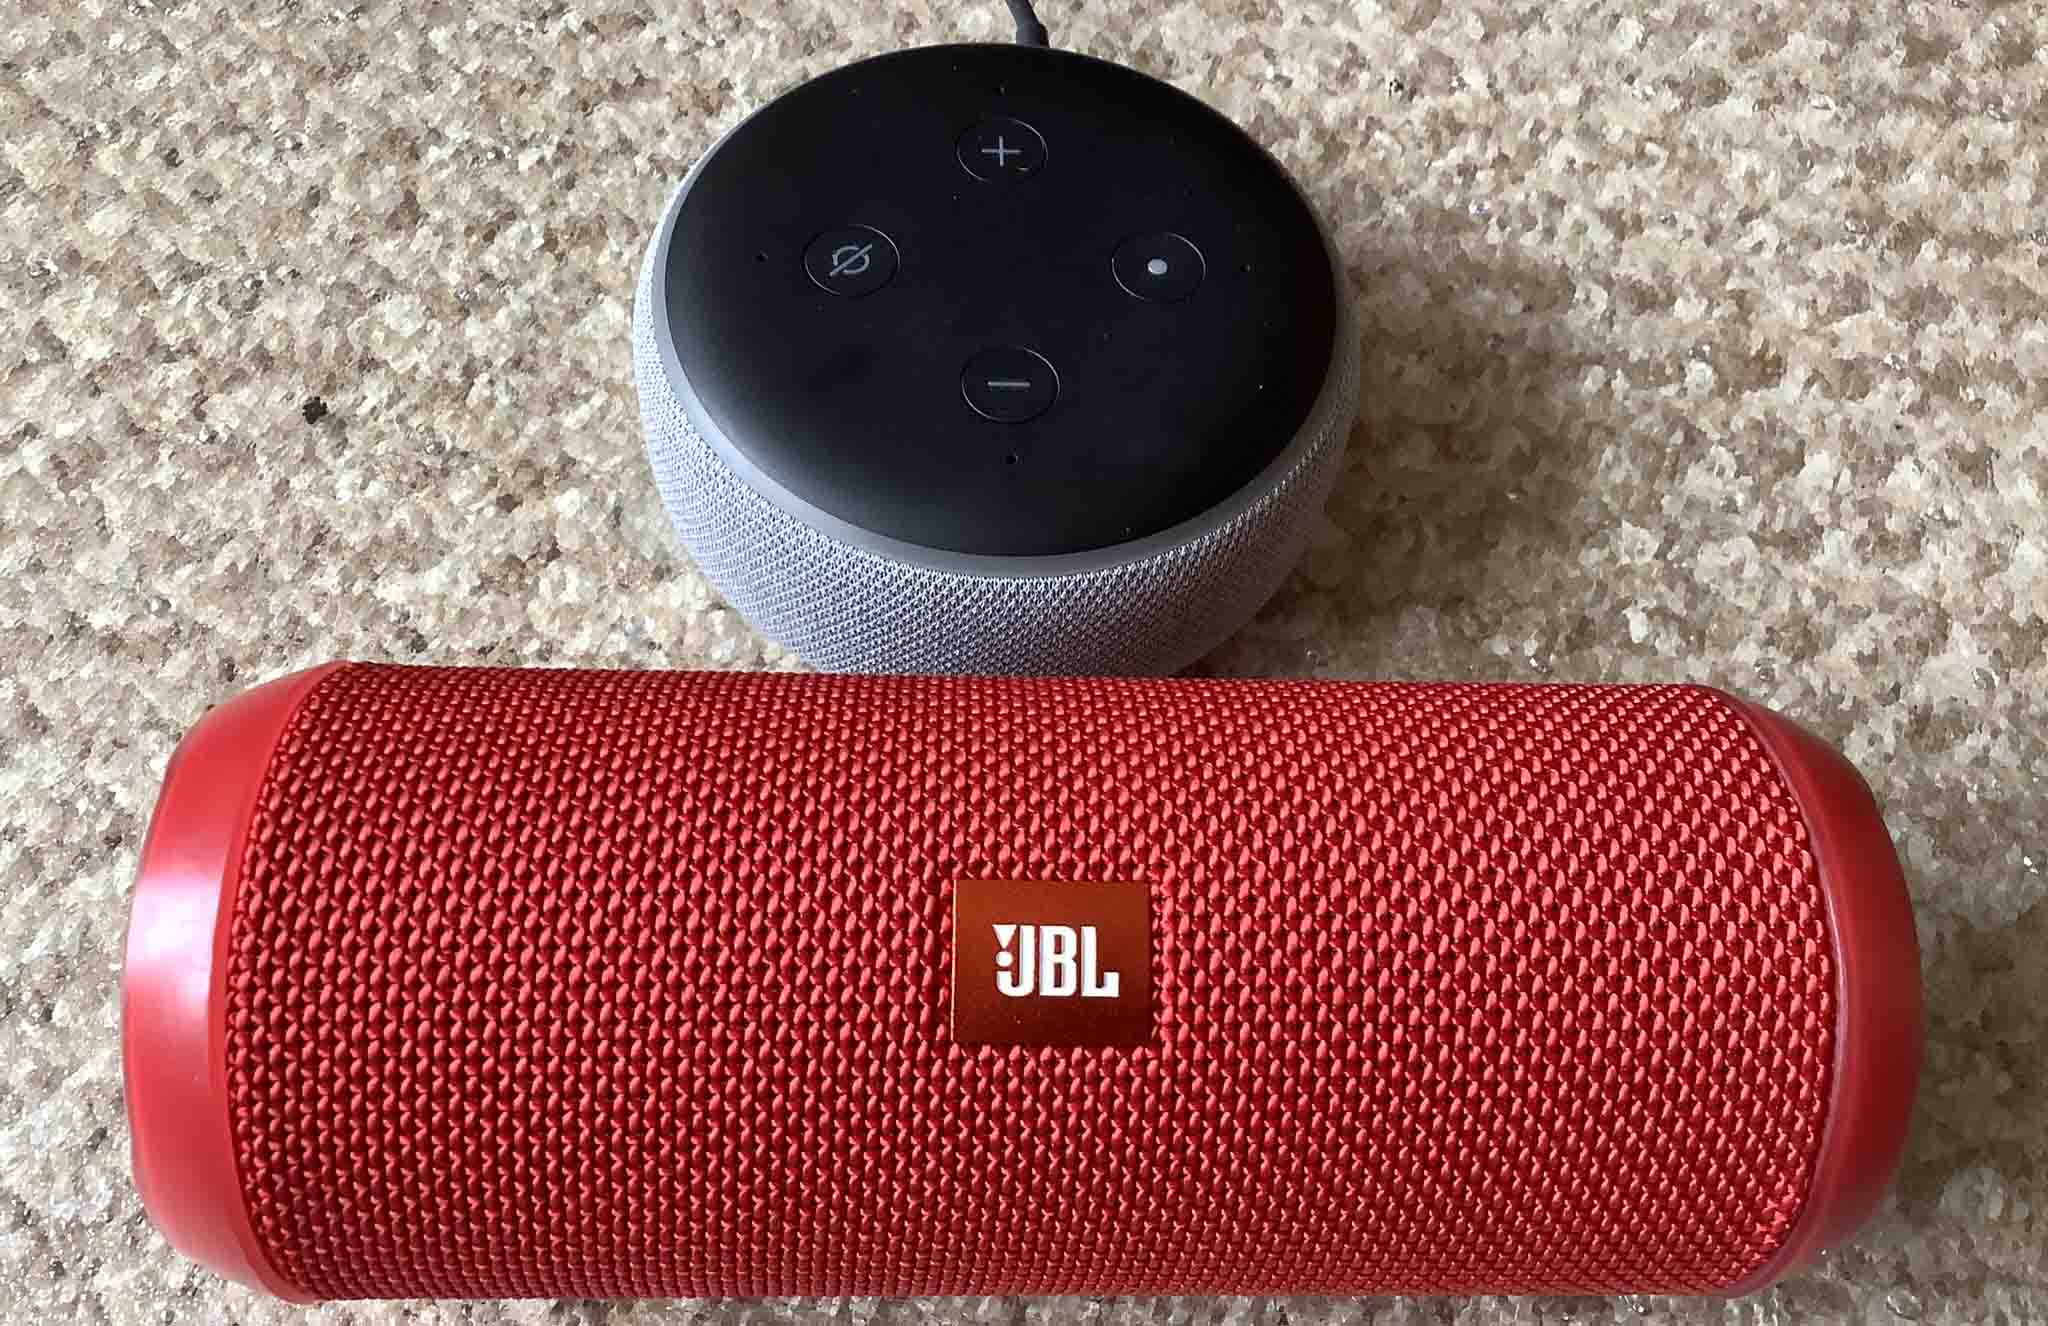 How To Connect To Jbl Bluetooth Speaker